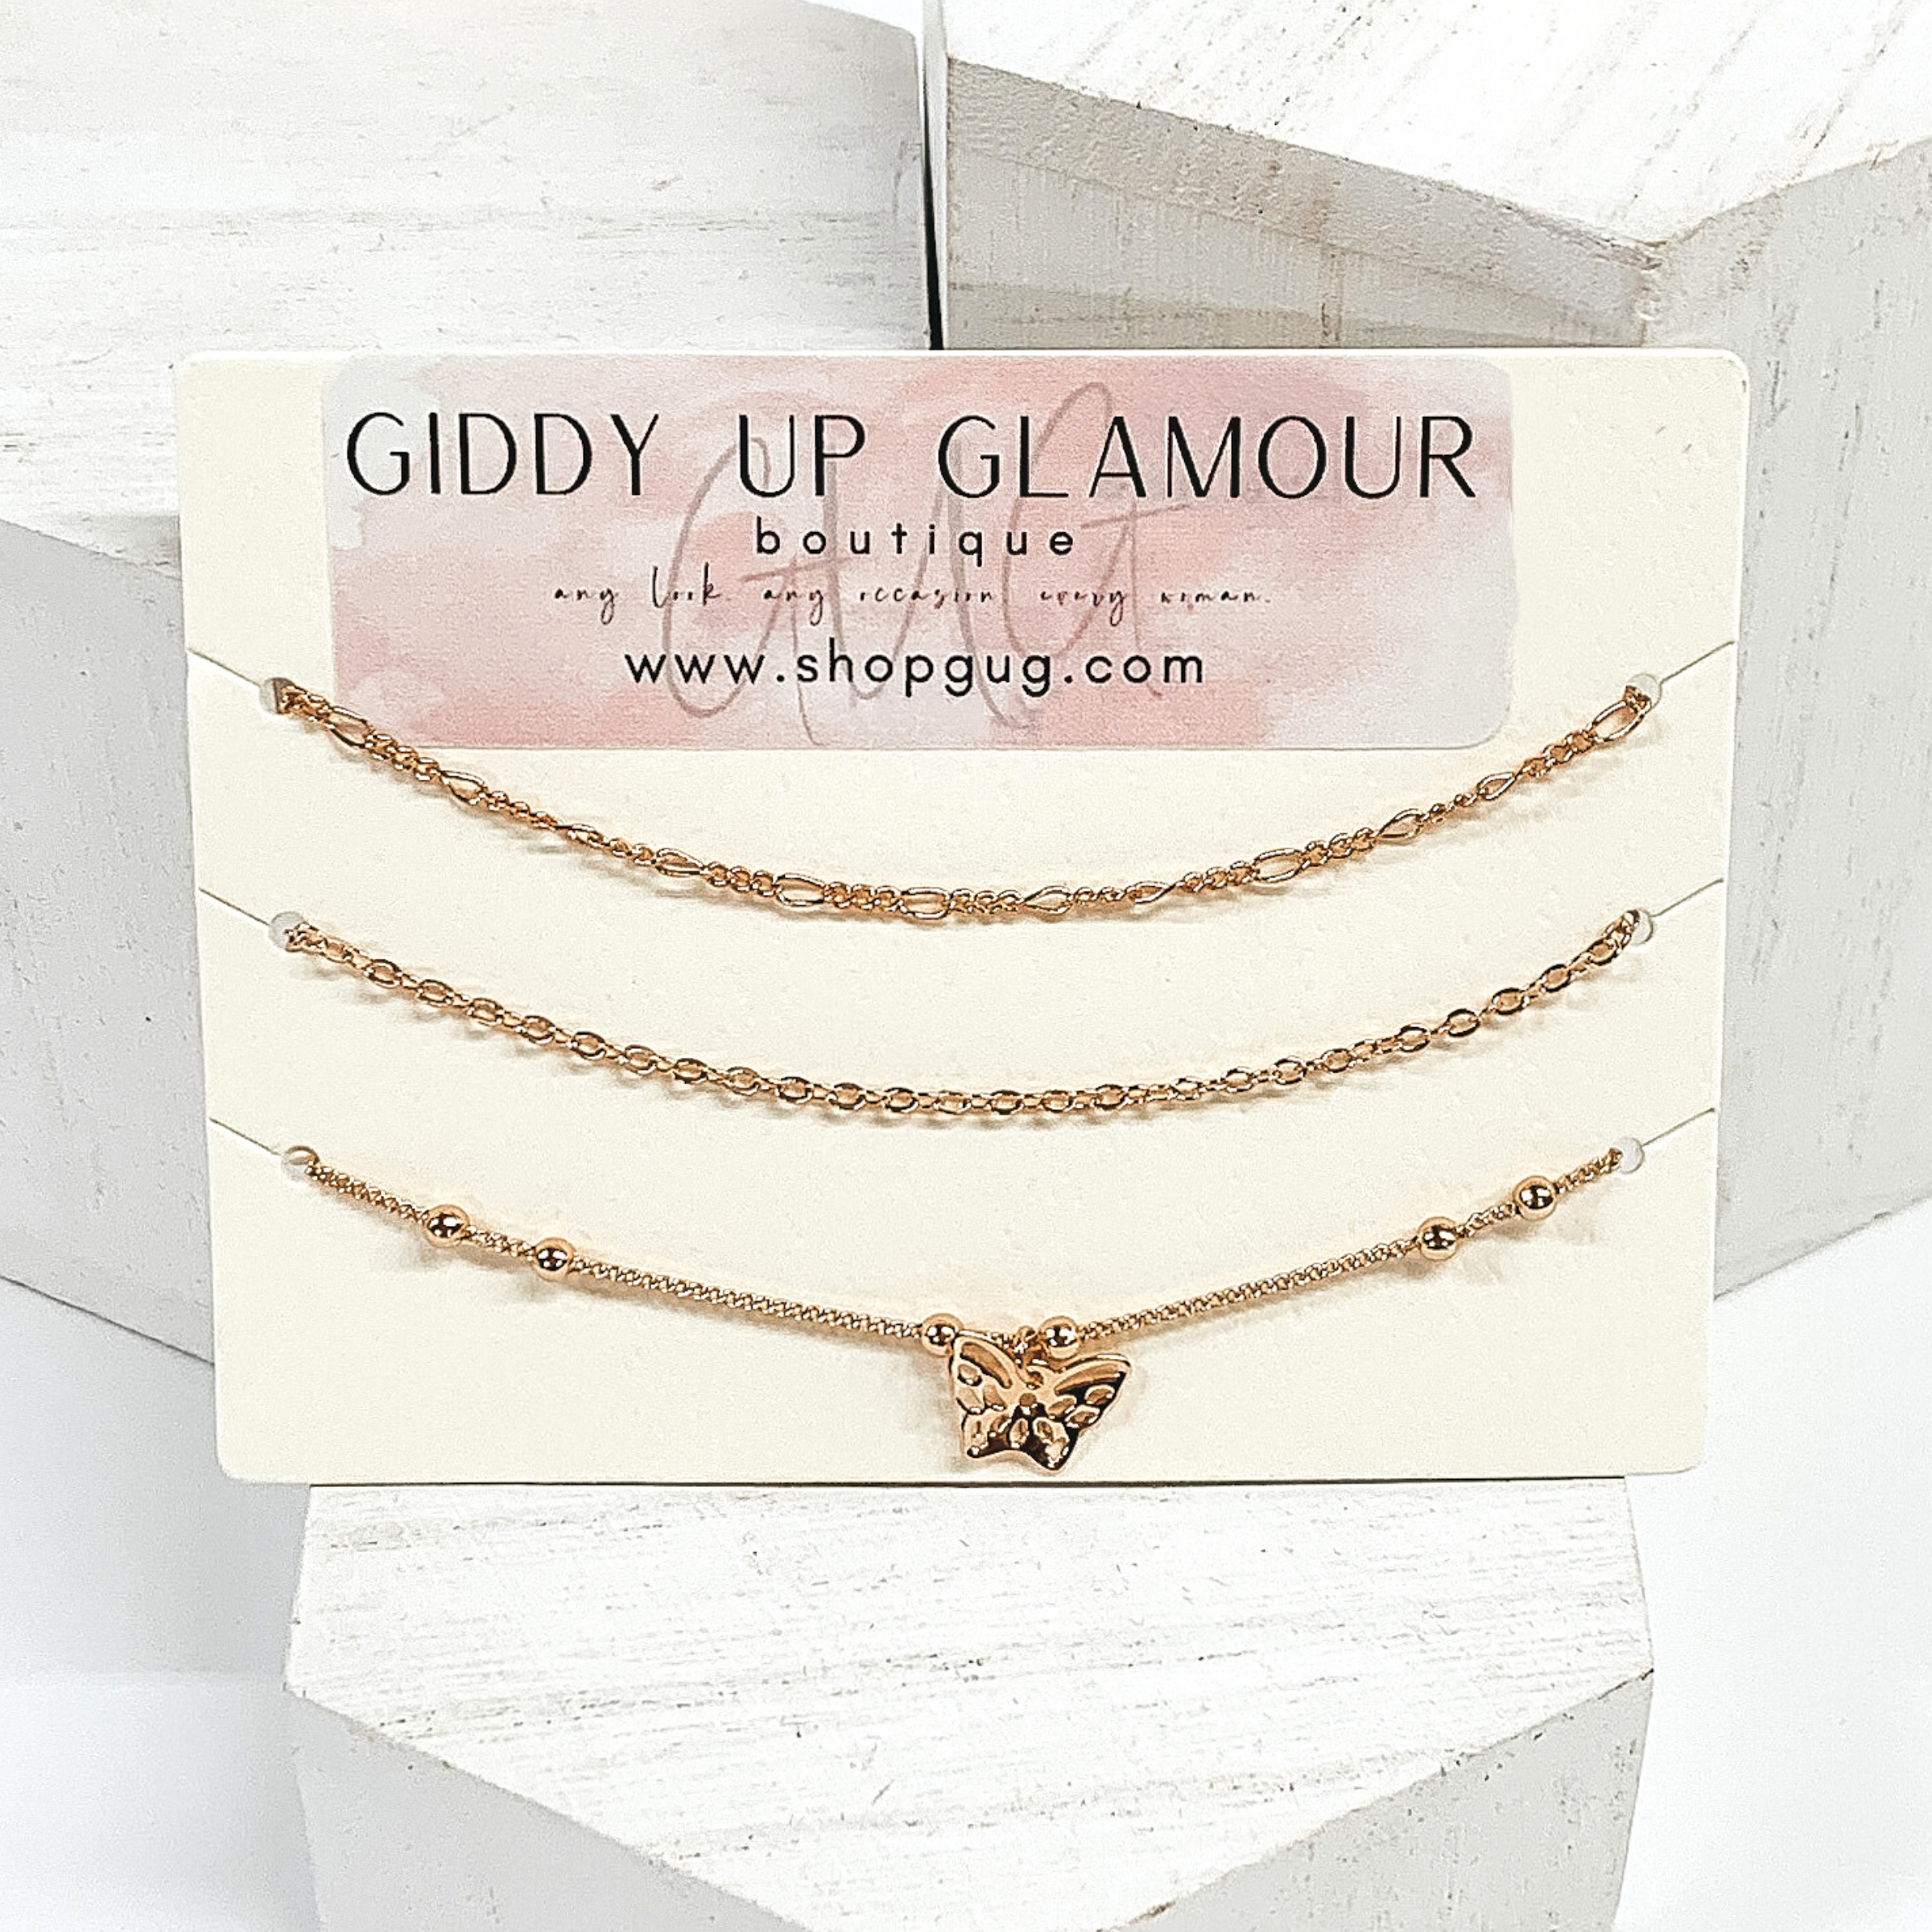 Three gold chained anklets, onw has a single butterfly charm. They are pictured on a white background